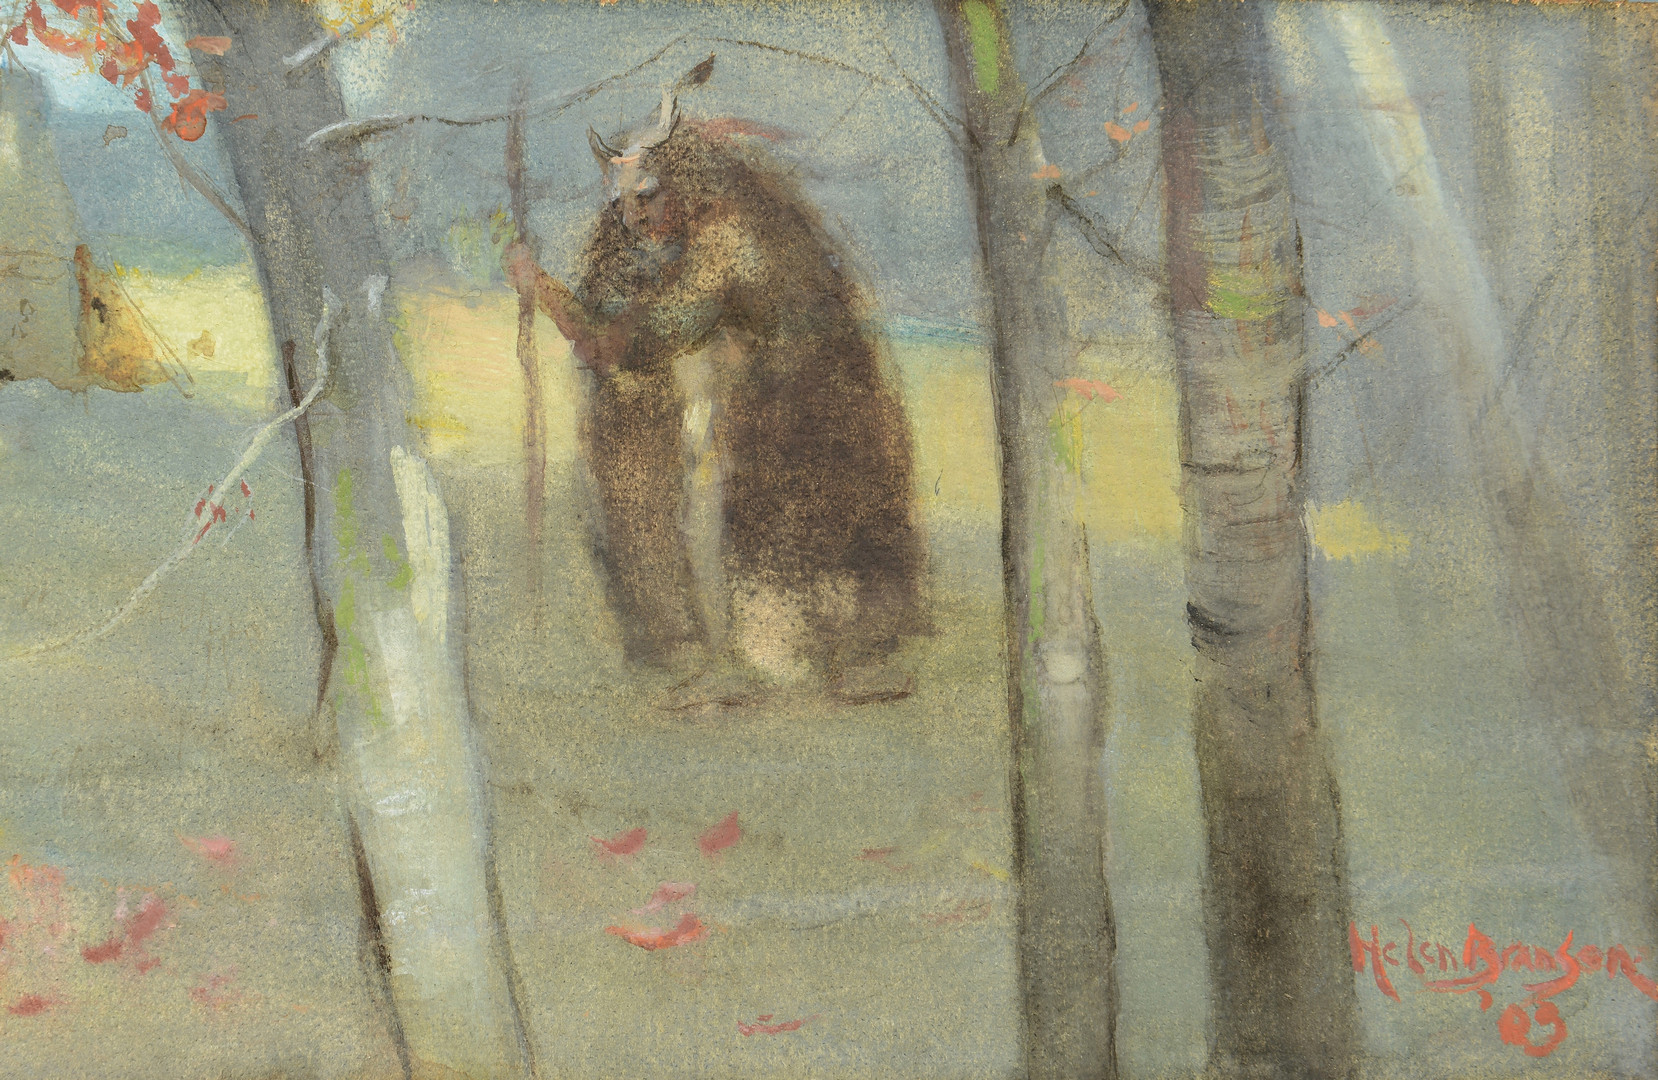 Lot 182: Lloyd Branson watercolor and pastel on board